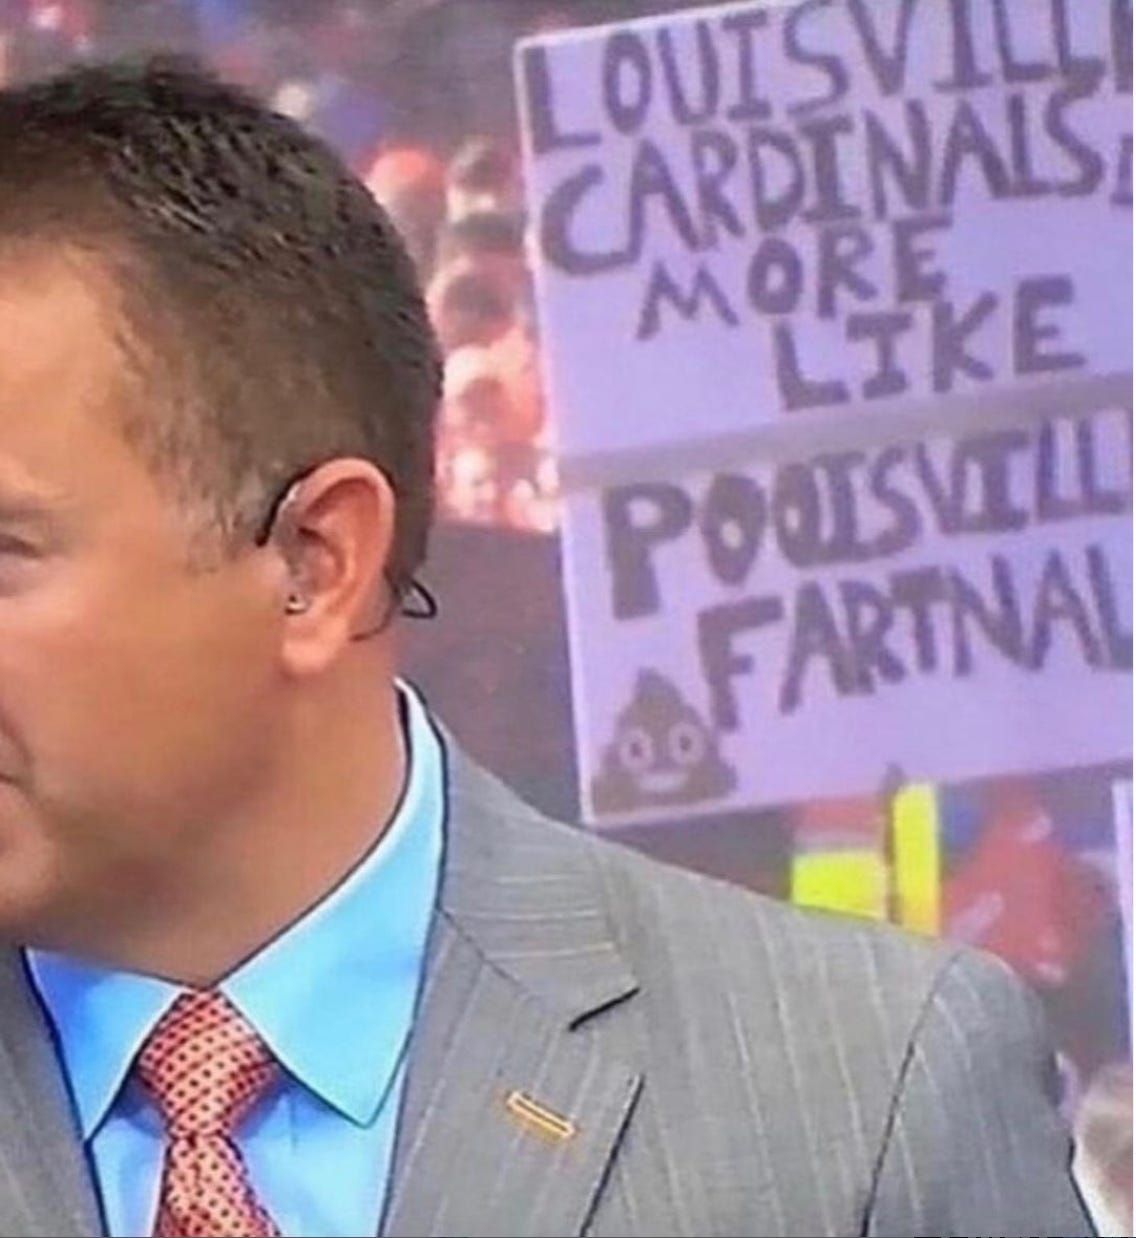 A bad snapshot of a TV screen showing a sportscaster with a fan sign in the background that reads LOUISVILLE CARDINALS? MORE LIKE POOISVILLE FARTNALS